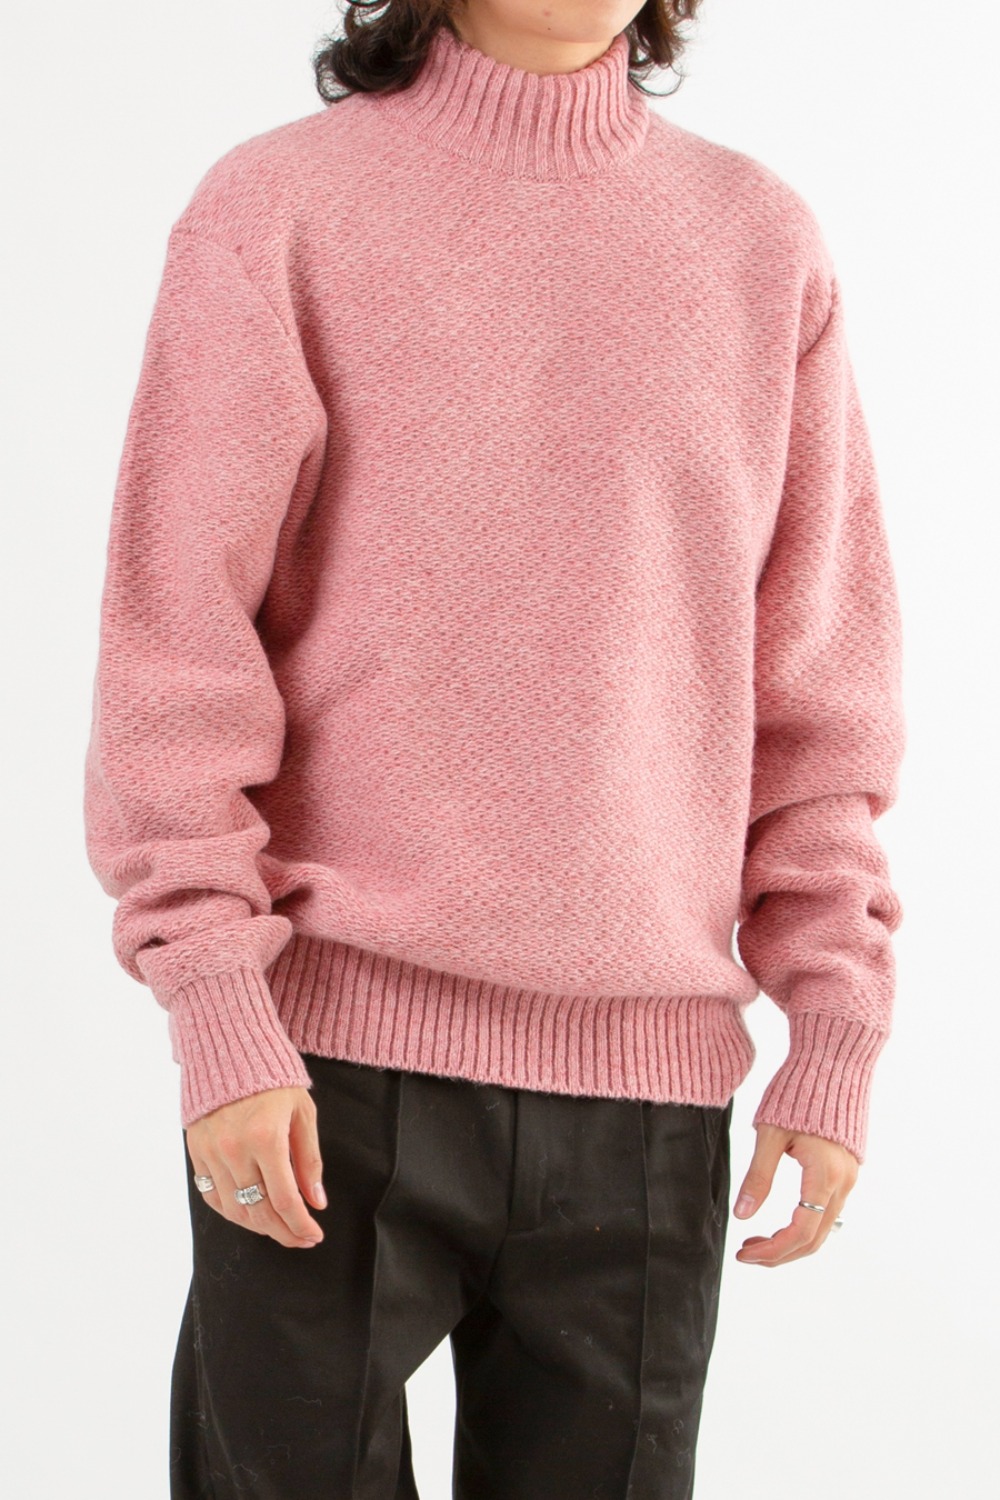 KNIT PULLOVER	- PINK